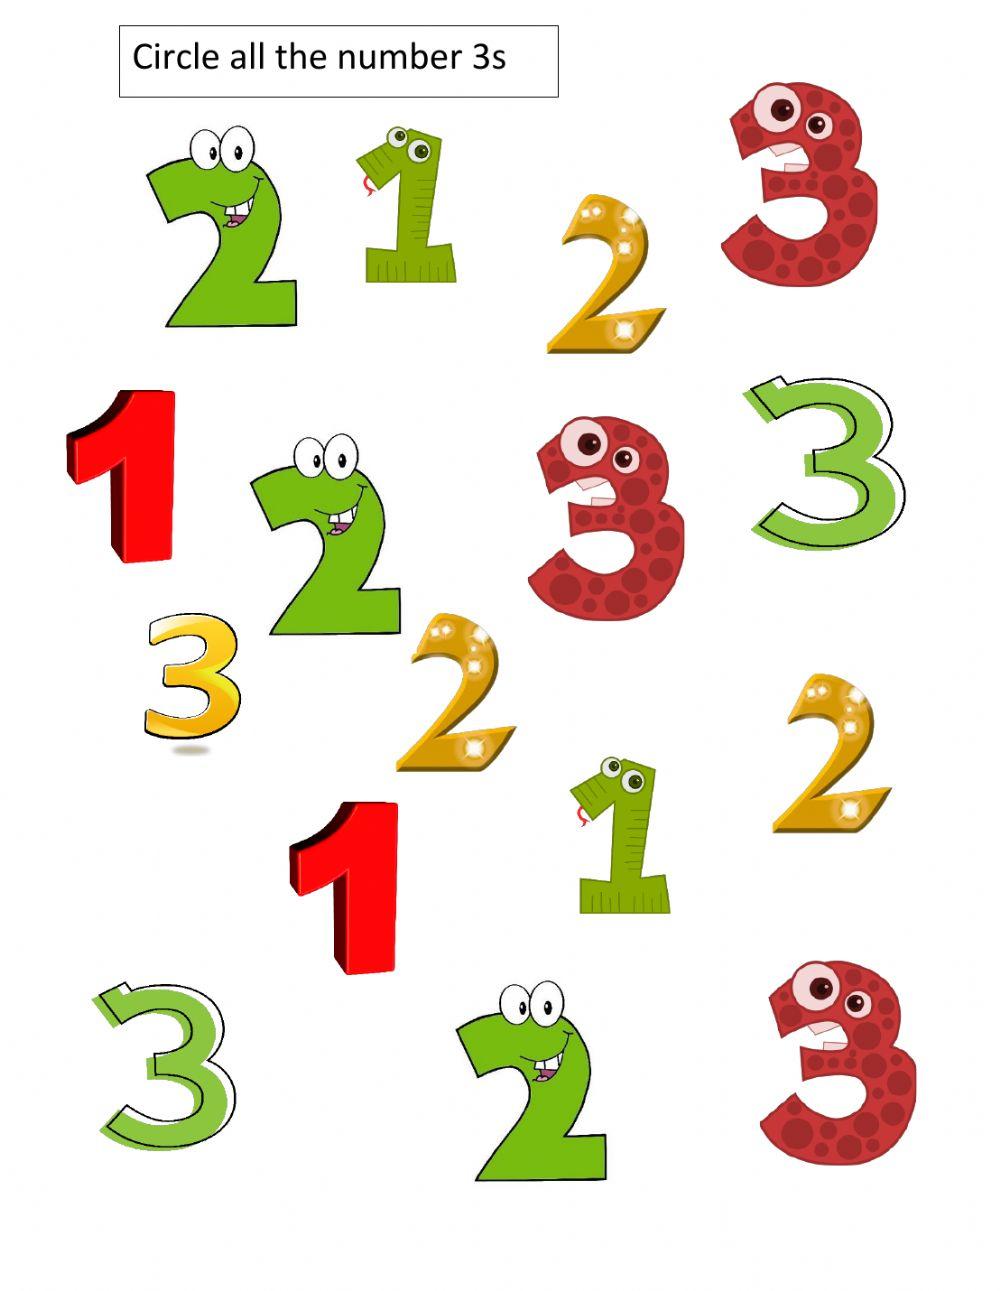 Find the number 3